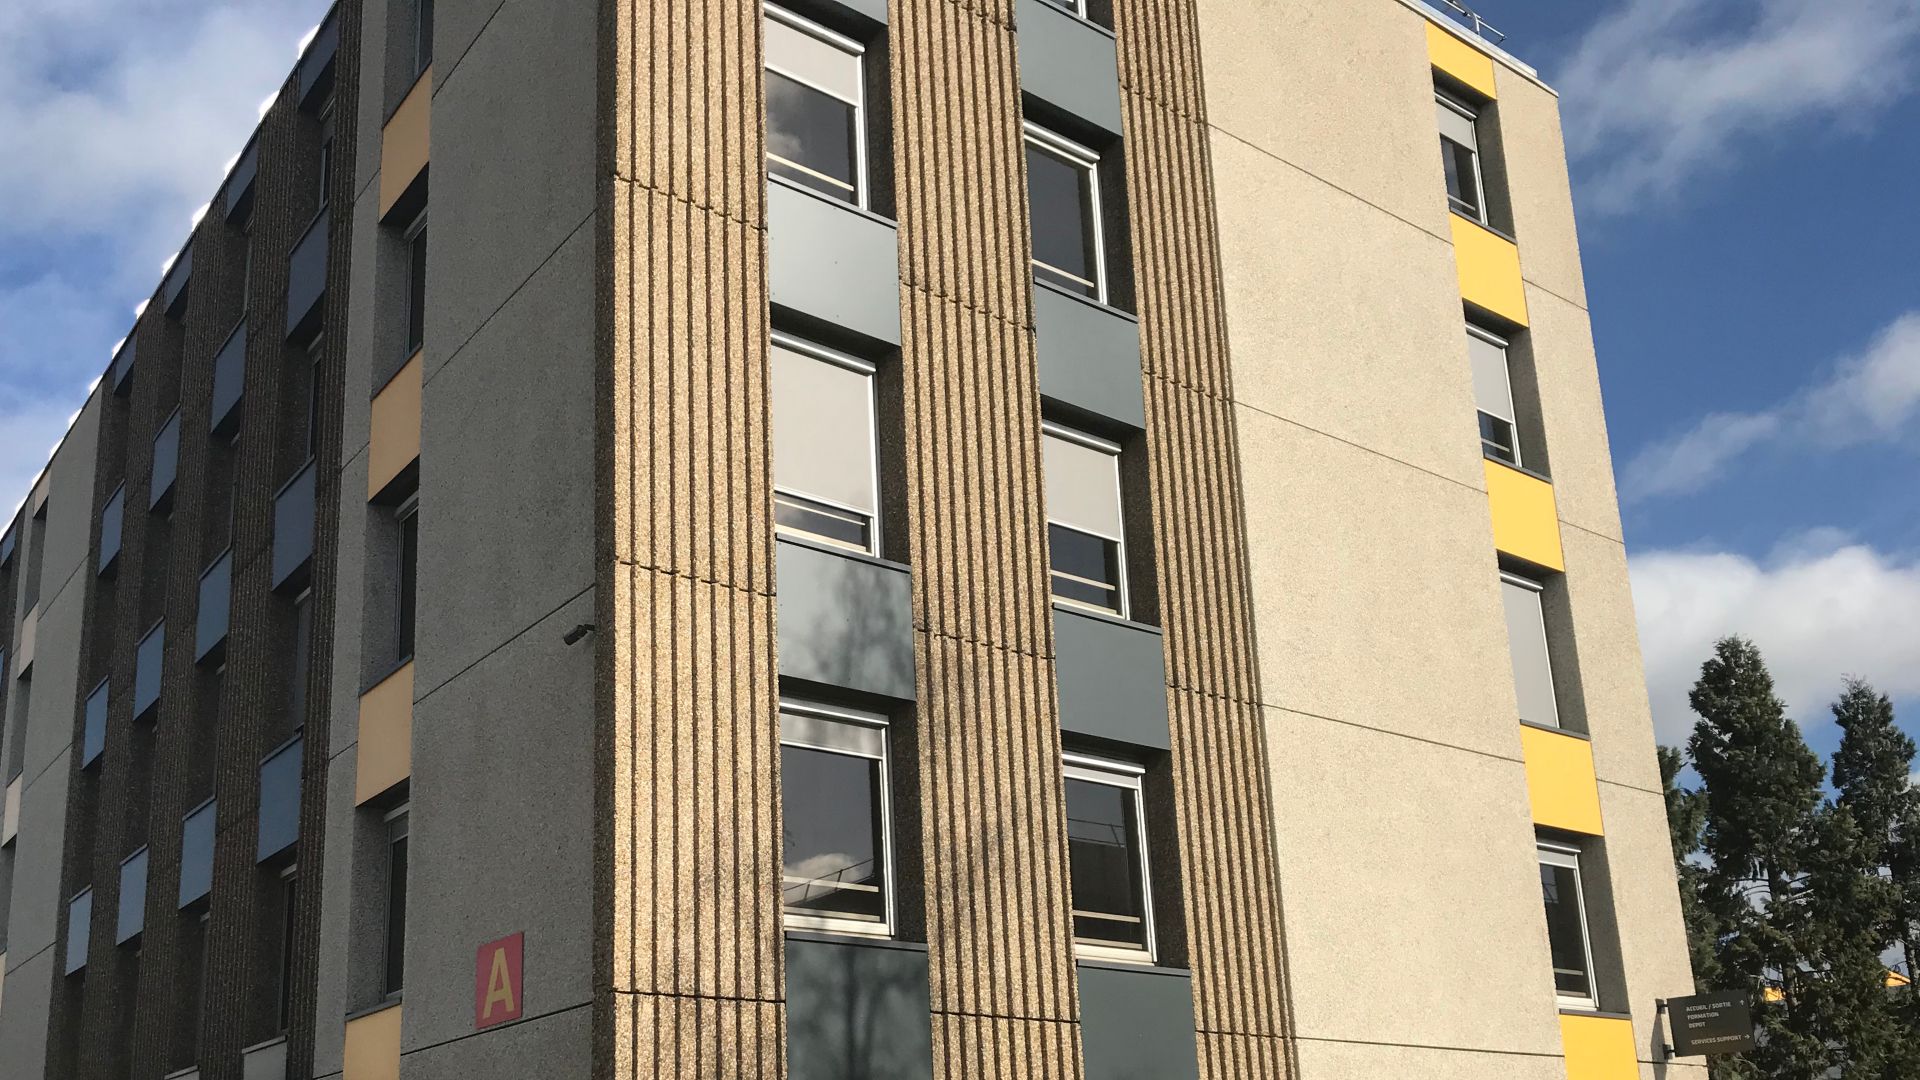 Sika® Rugasol® surface retarder applied to concrete for exposed aggregate finish on building facade